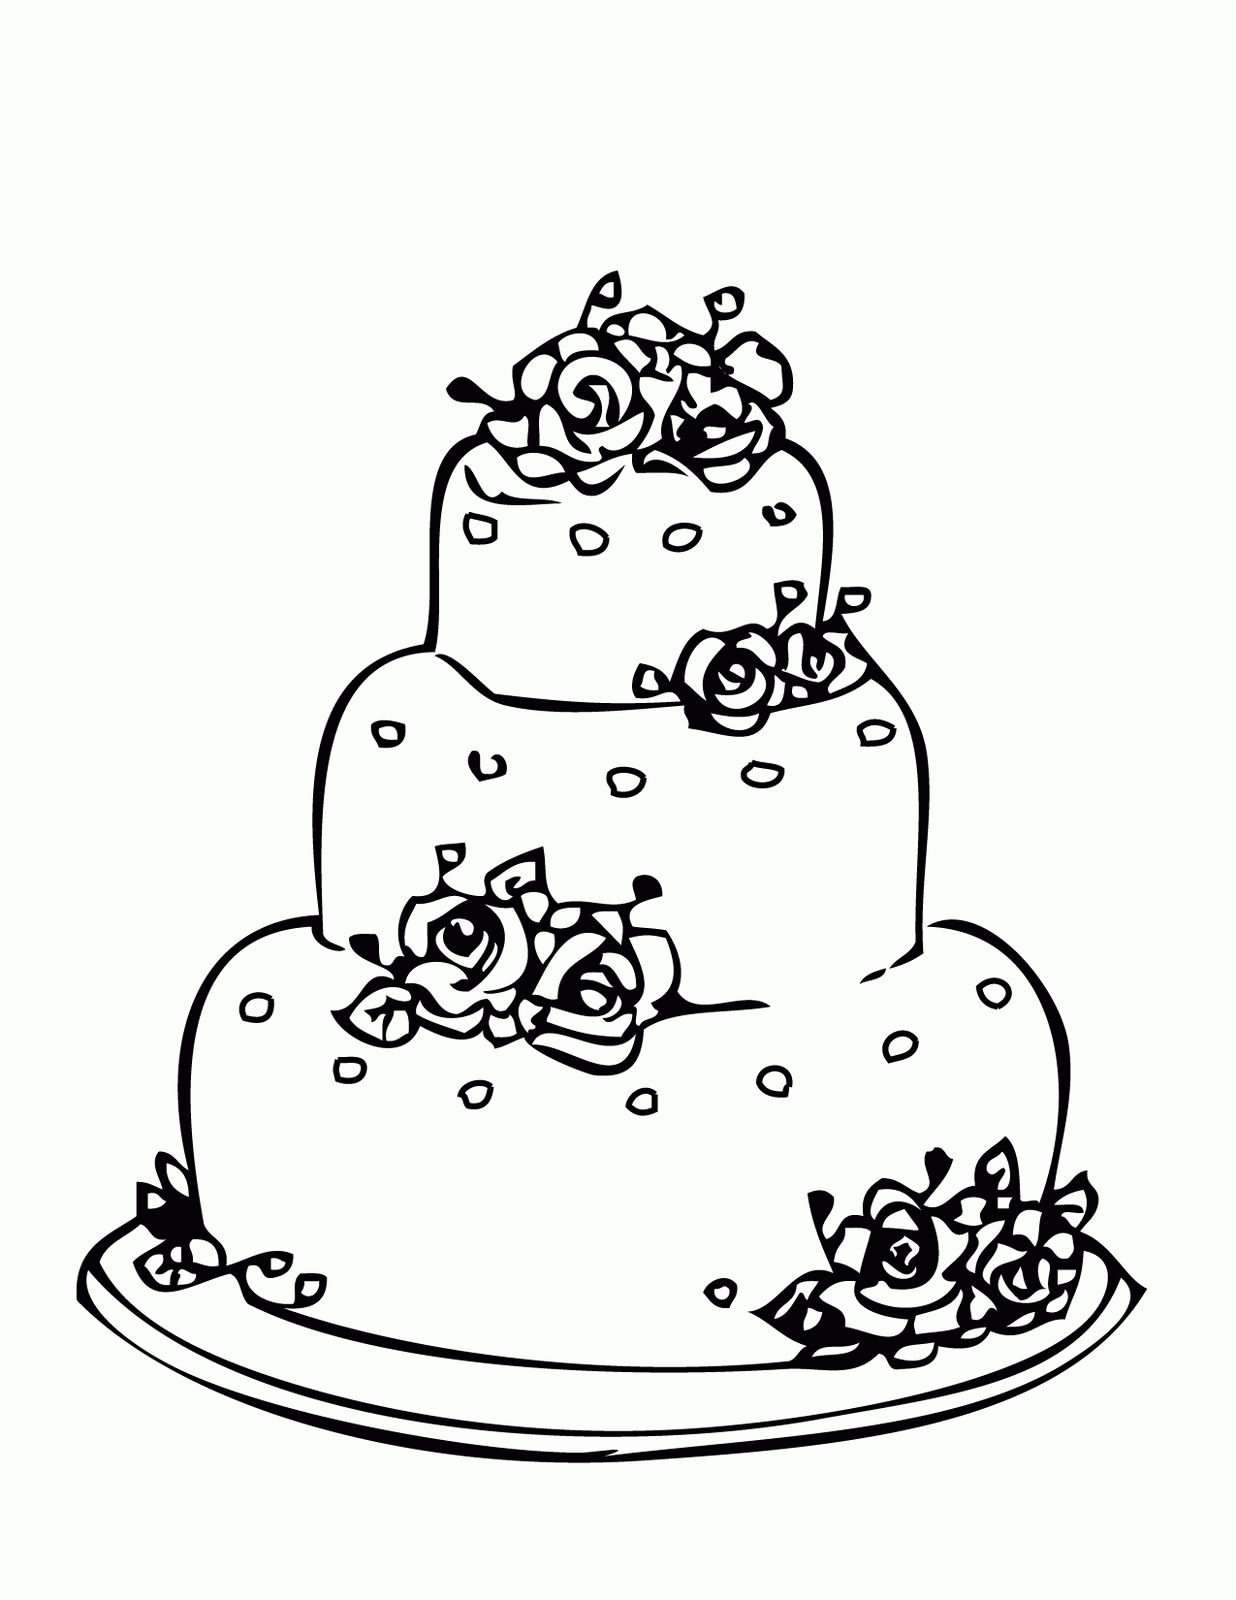 Cake To Color | Coloring Pages